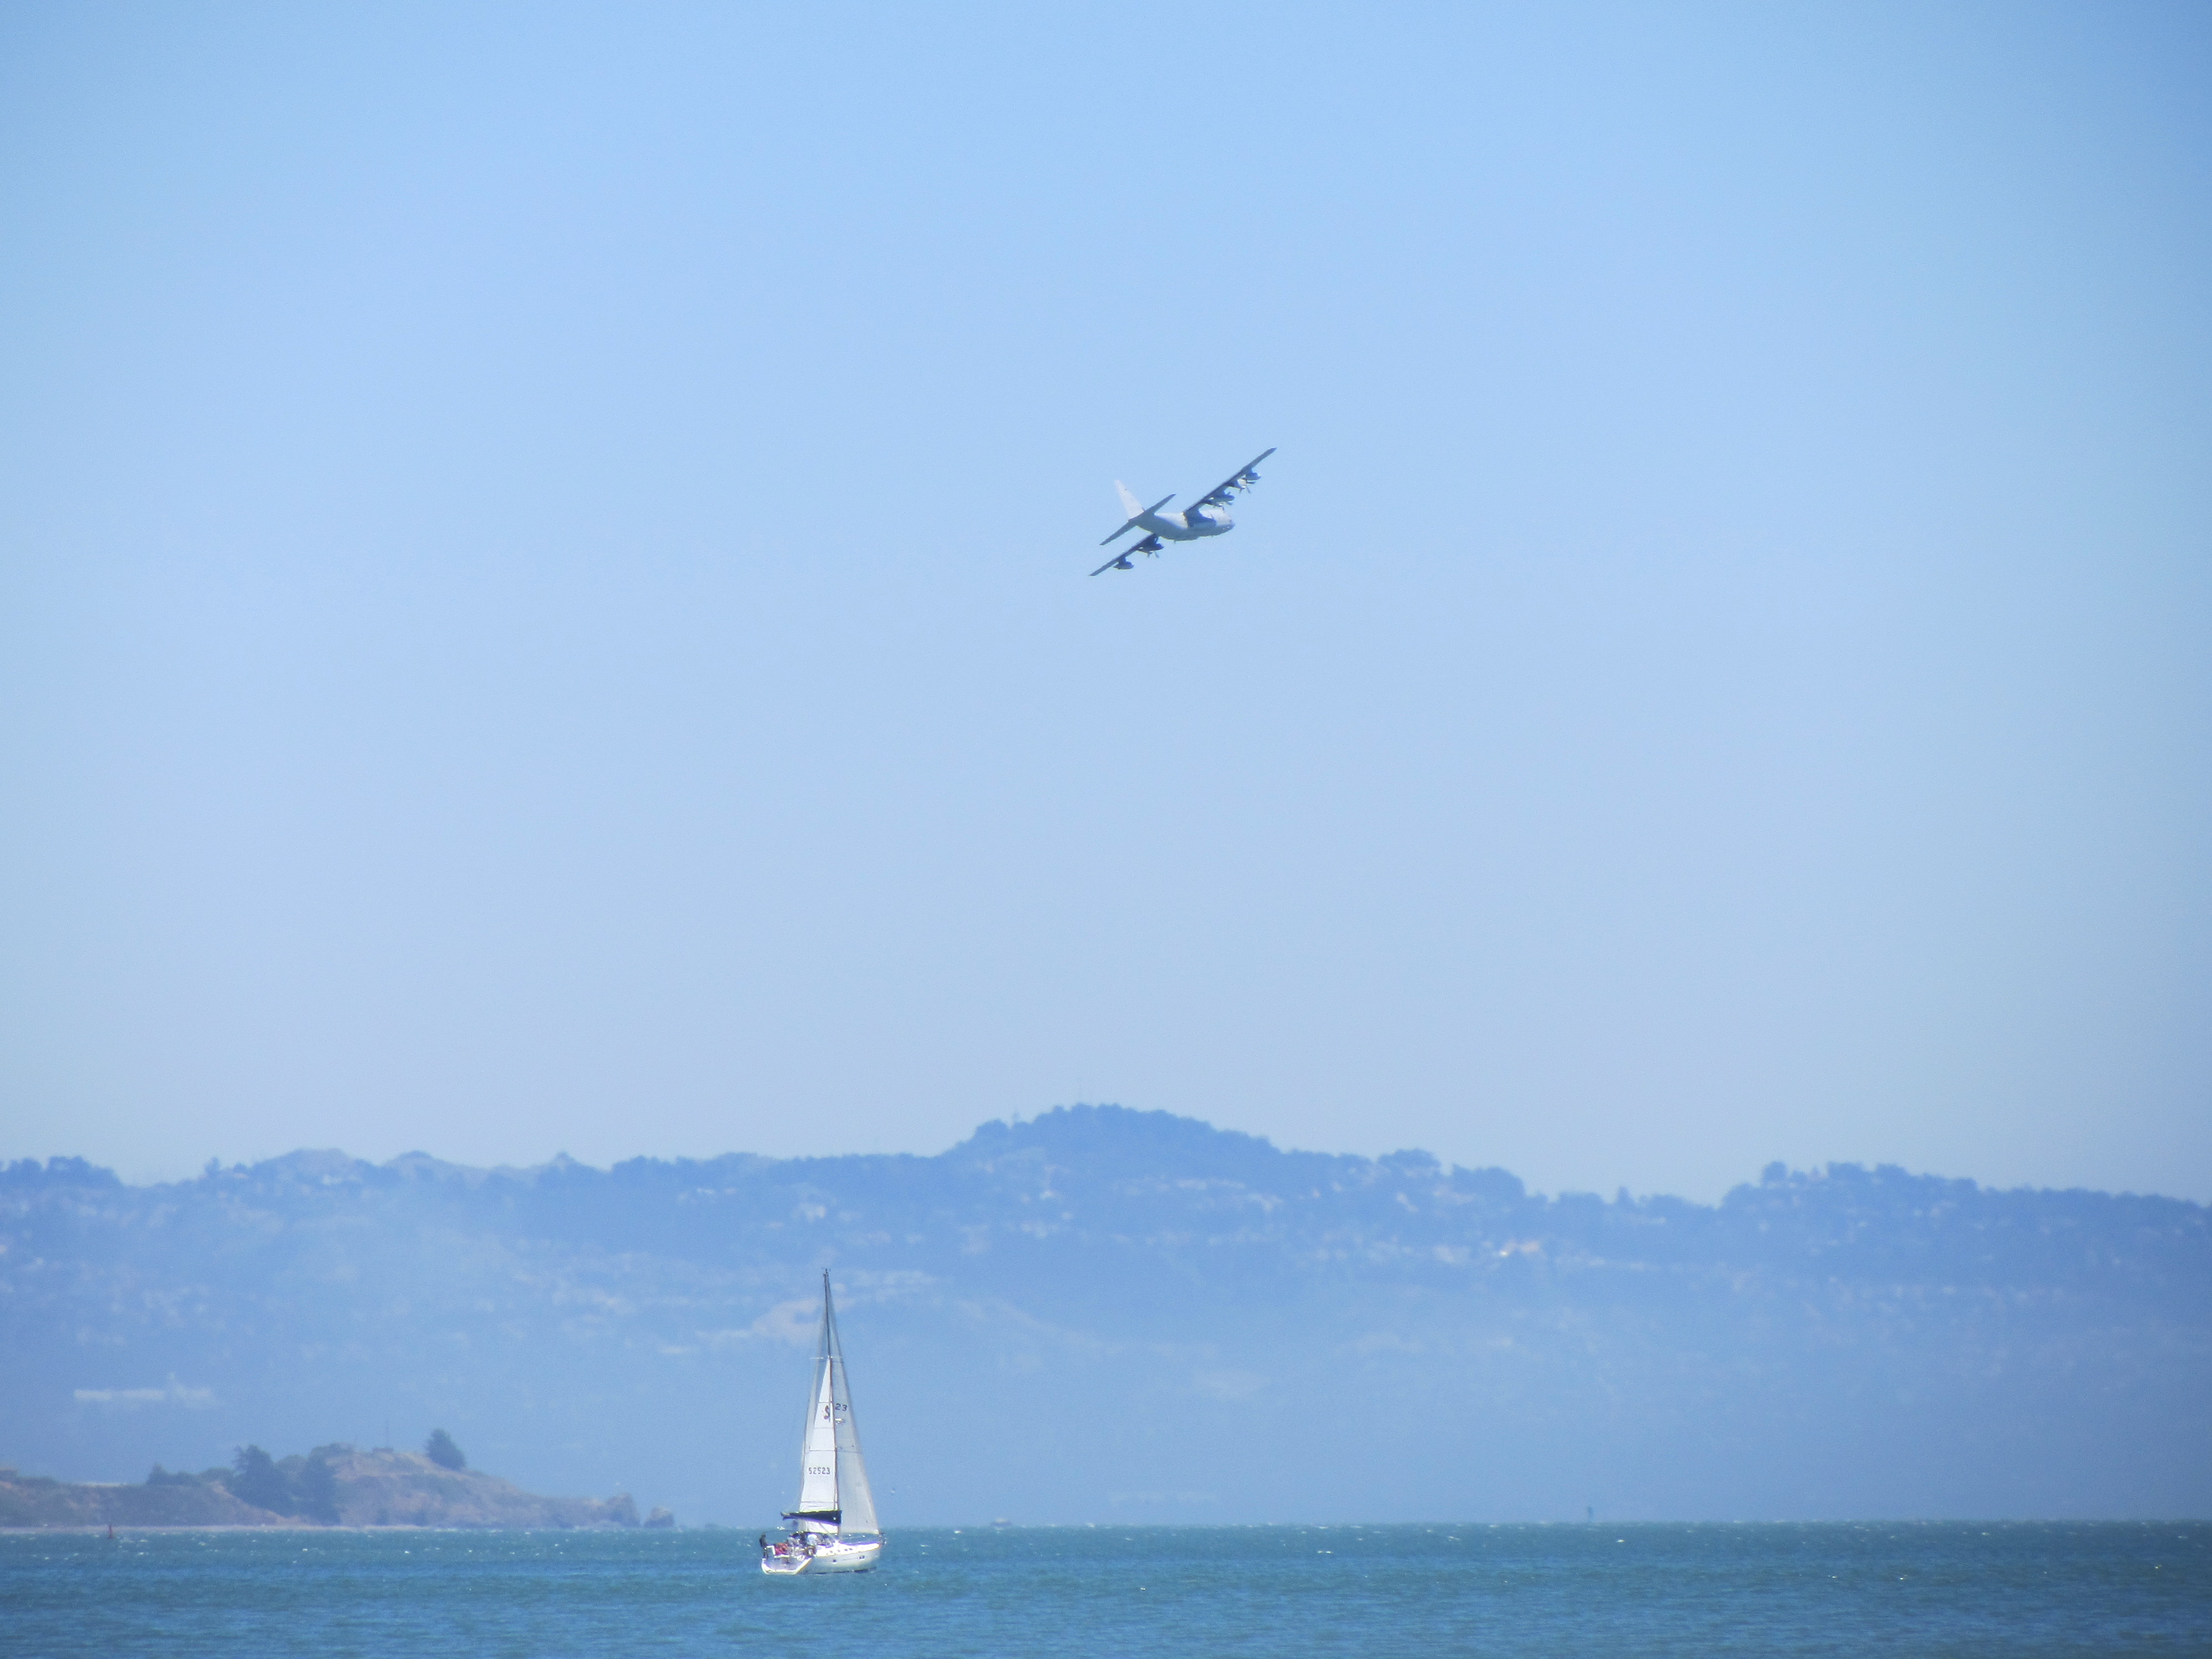 Low Flying Plane Over San Francisco Bay by Kelley Eling, Marin County Realtor